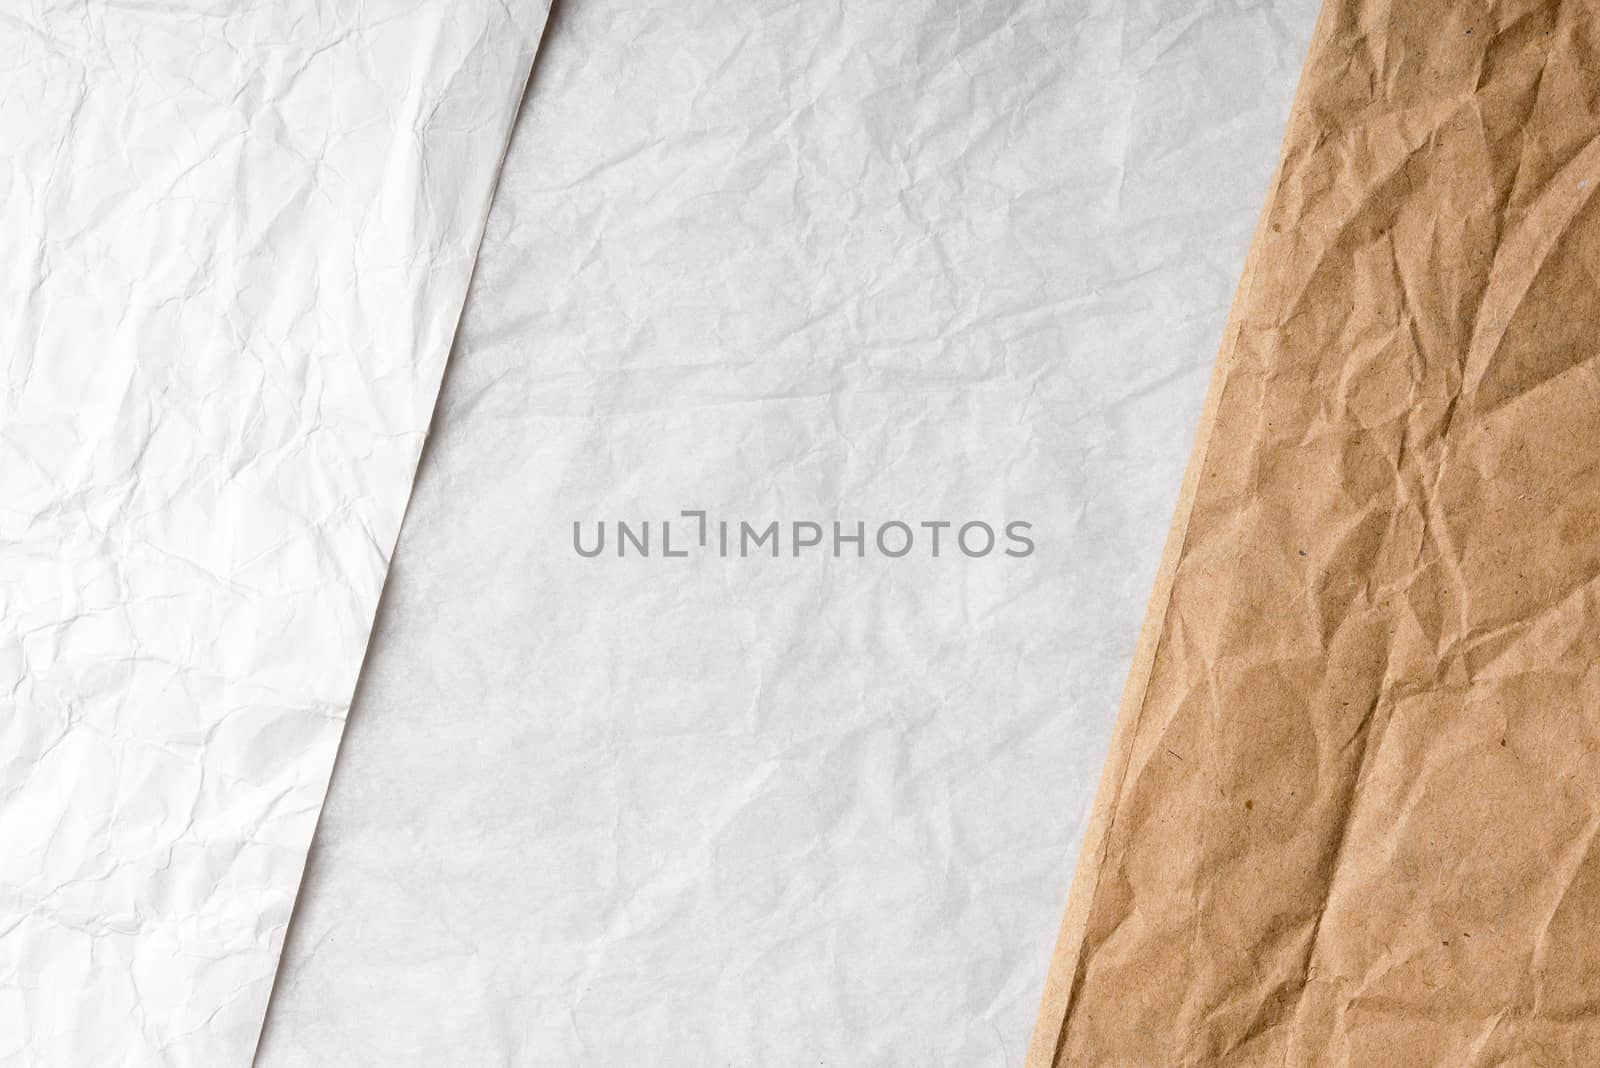 Three crumpled papers texture for background use